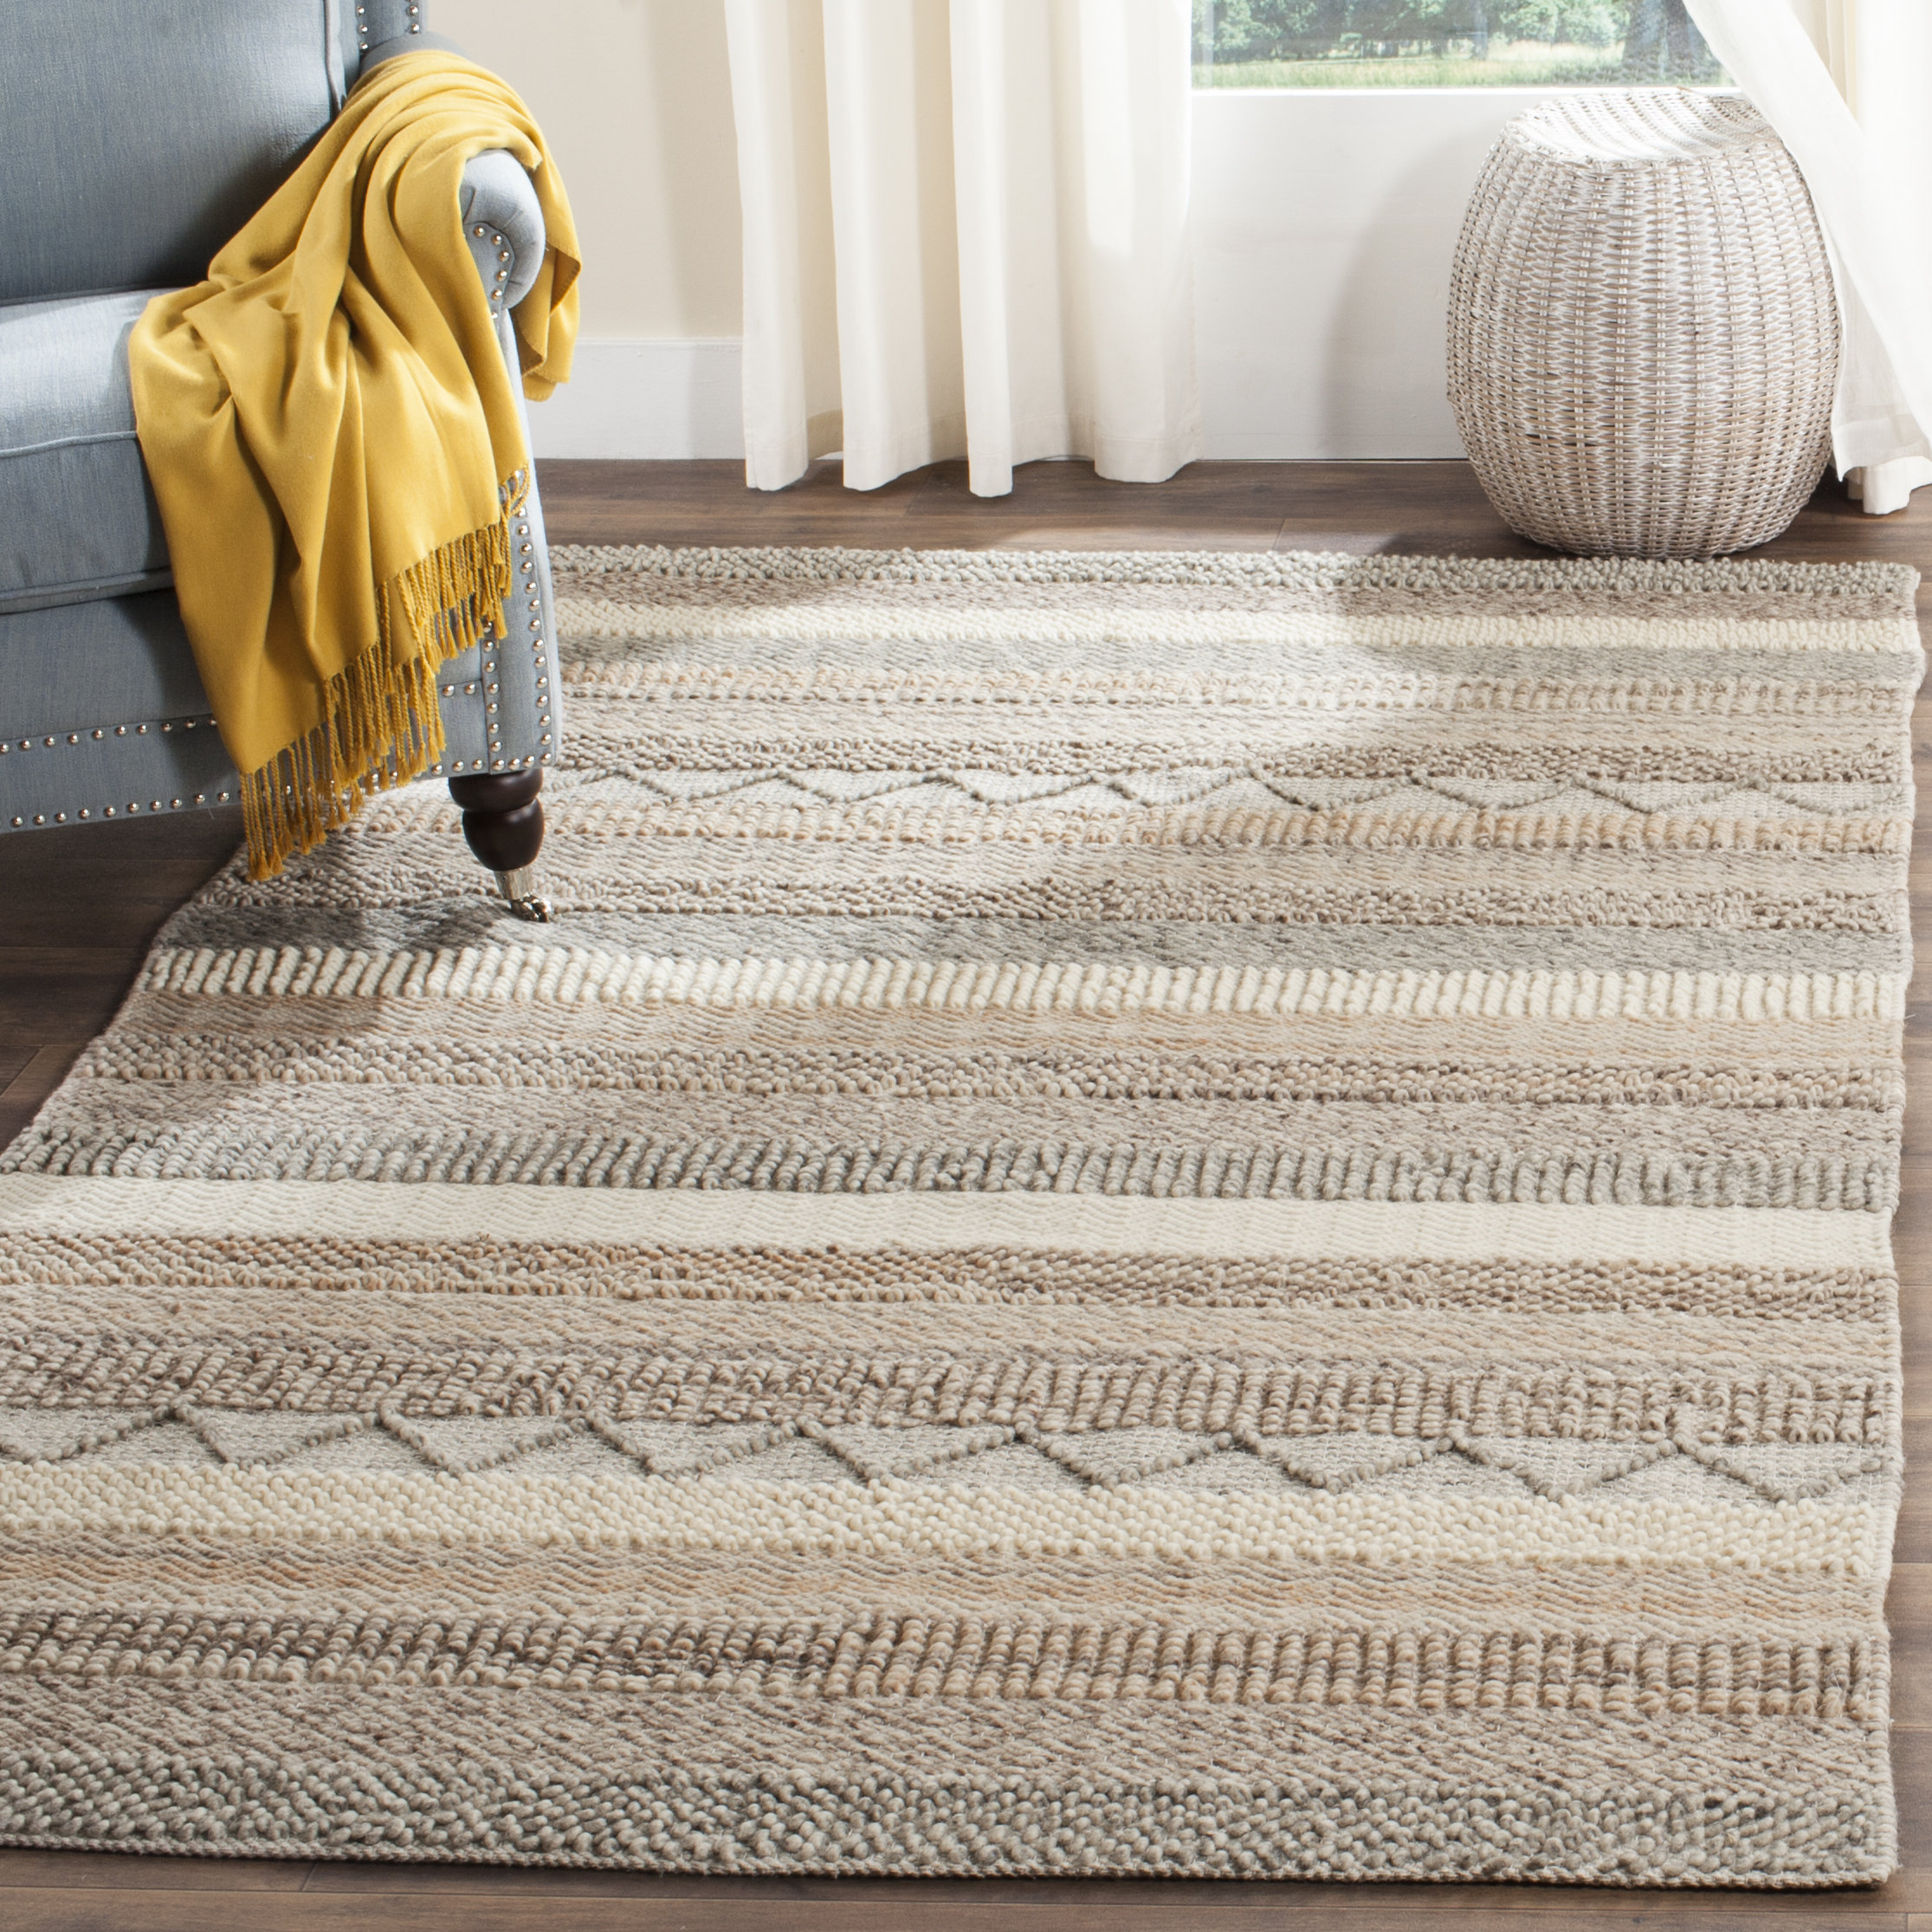 COAST Gorgeous Wool Hand Woven Rugs with SPECIAL OFFER LARA 